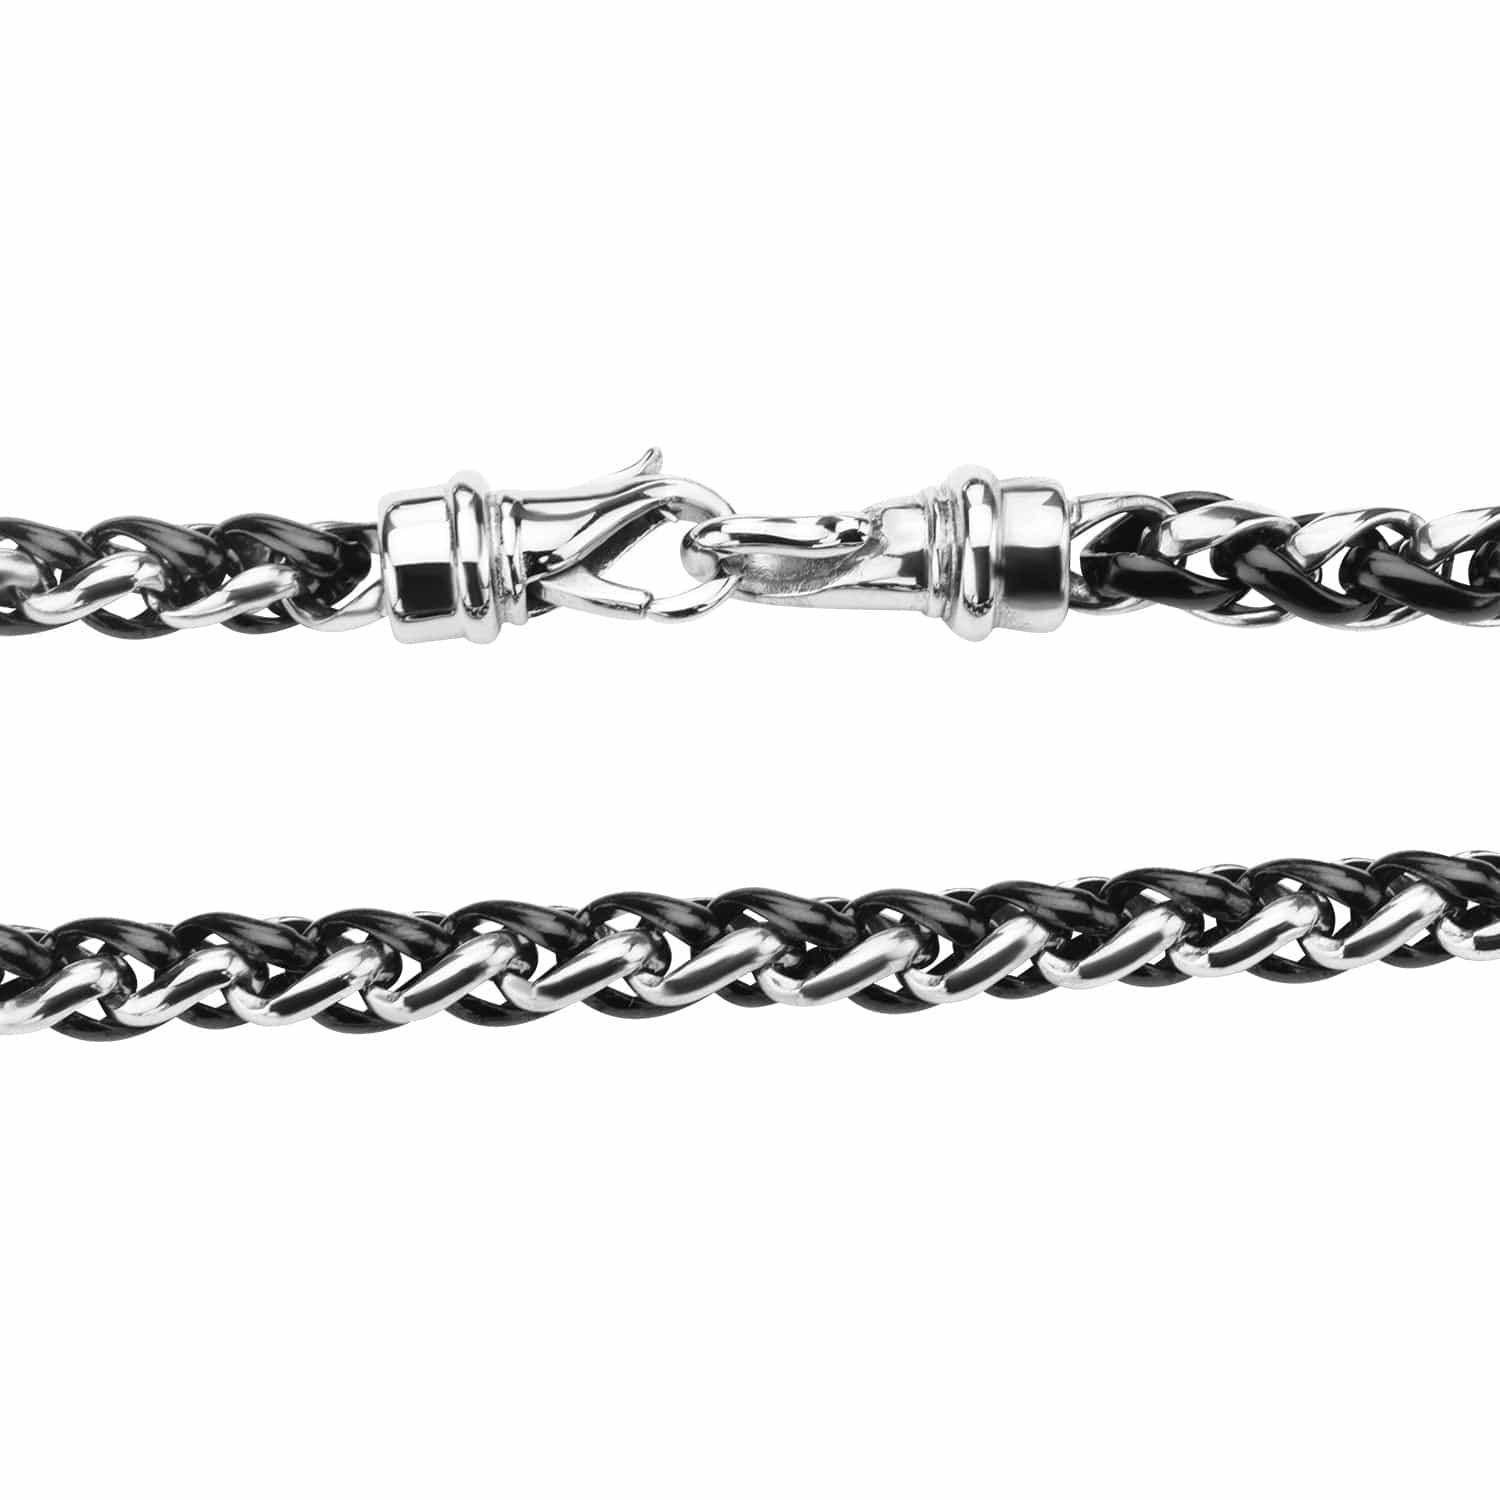 INOX JEWELRY Chains Silver and Black Stainless Steel Wheat Chain